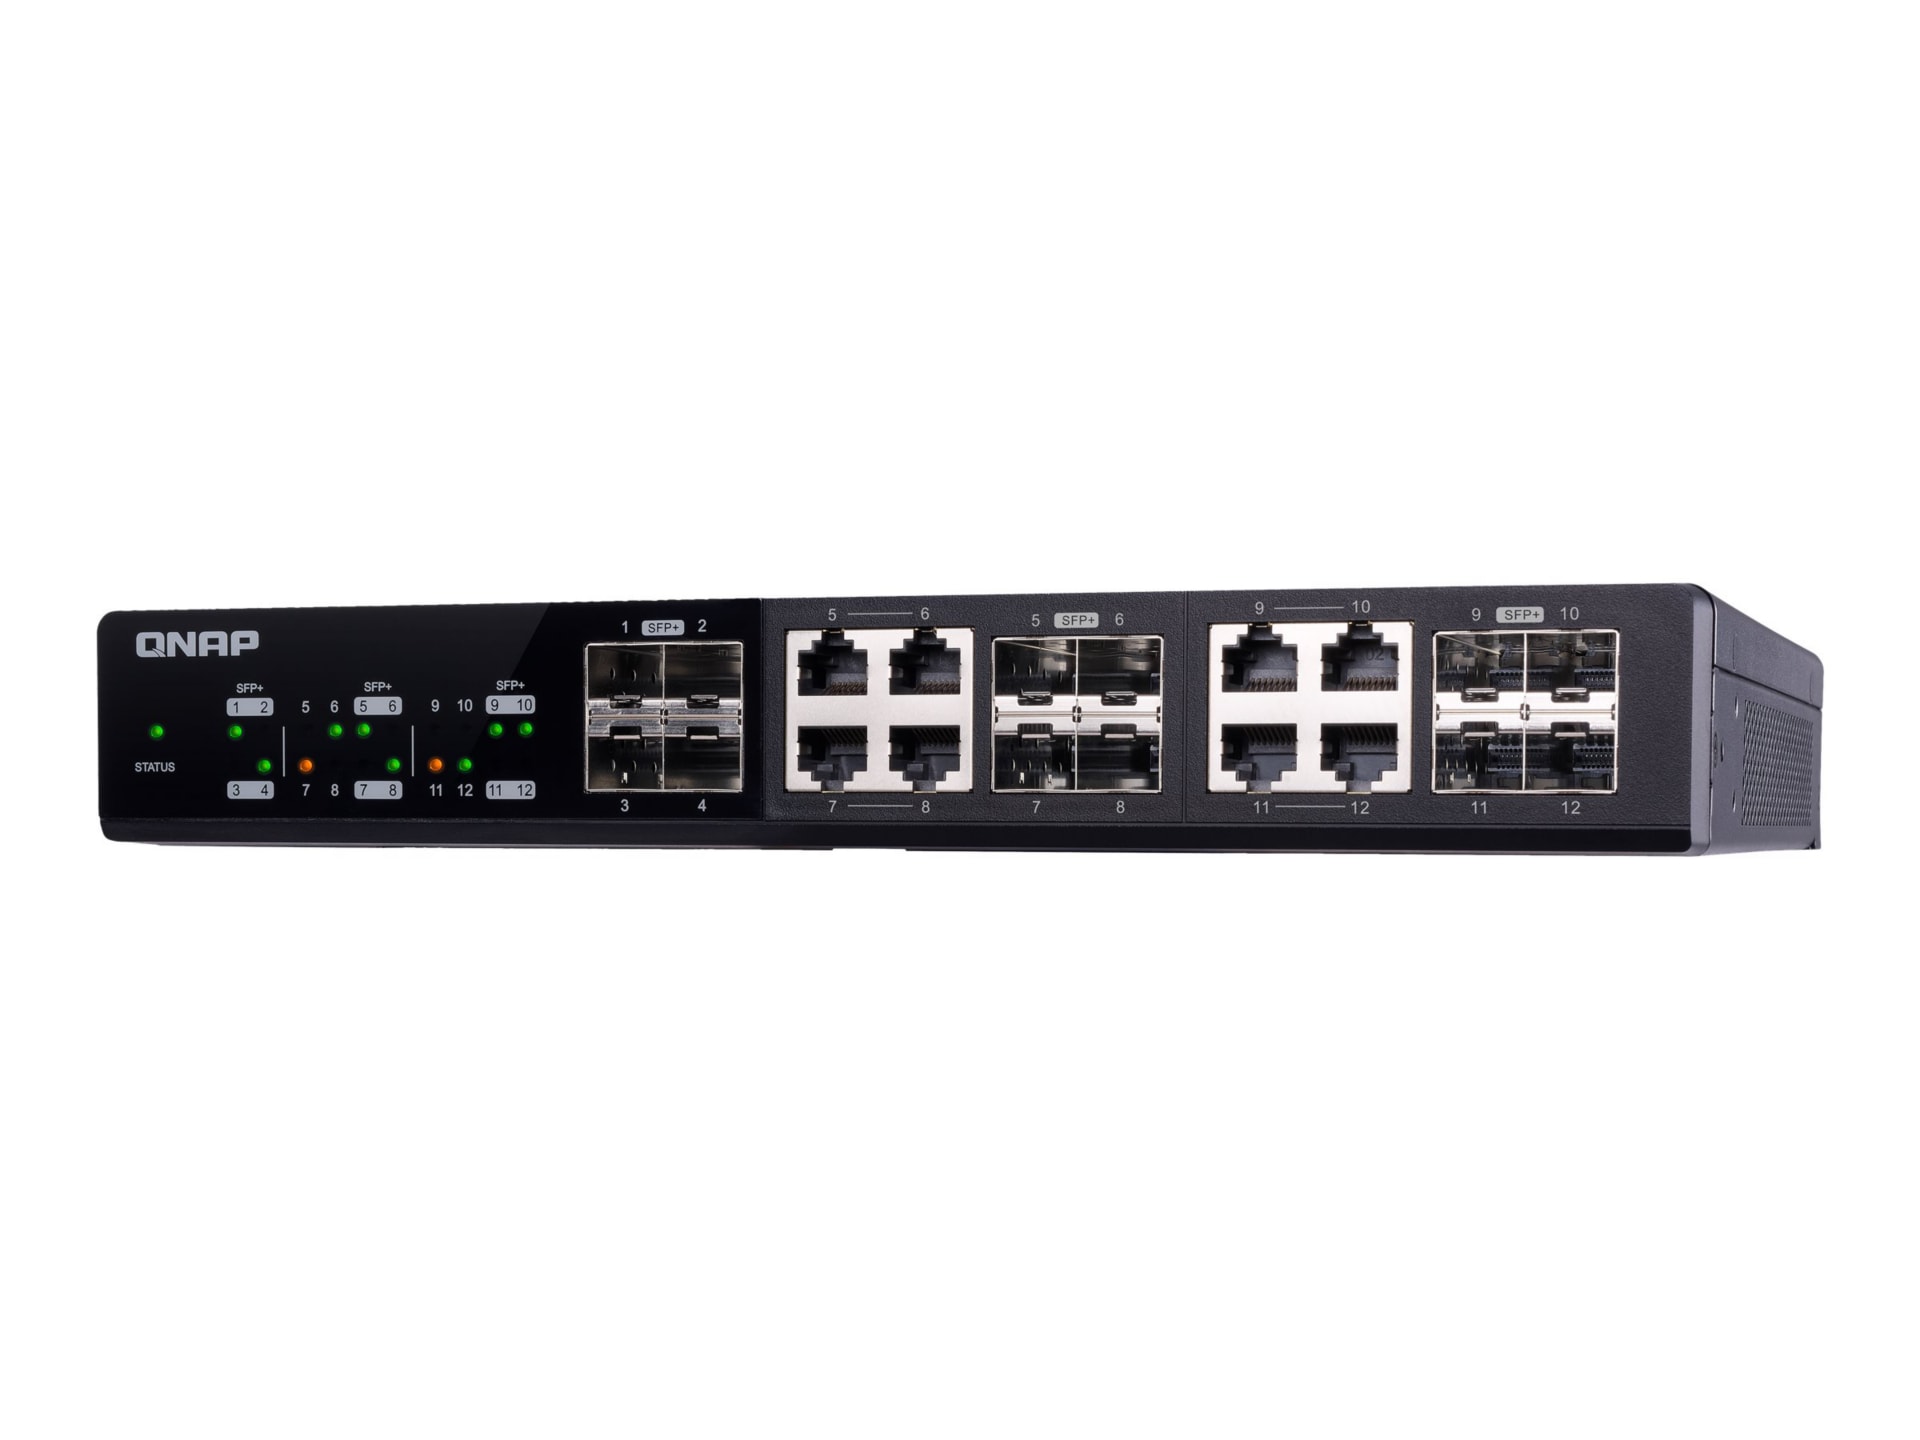 QNAP QSW-M1208-8C - switch - 12 ports - managed - rack-mountable